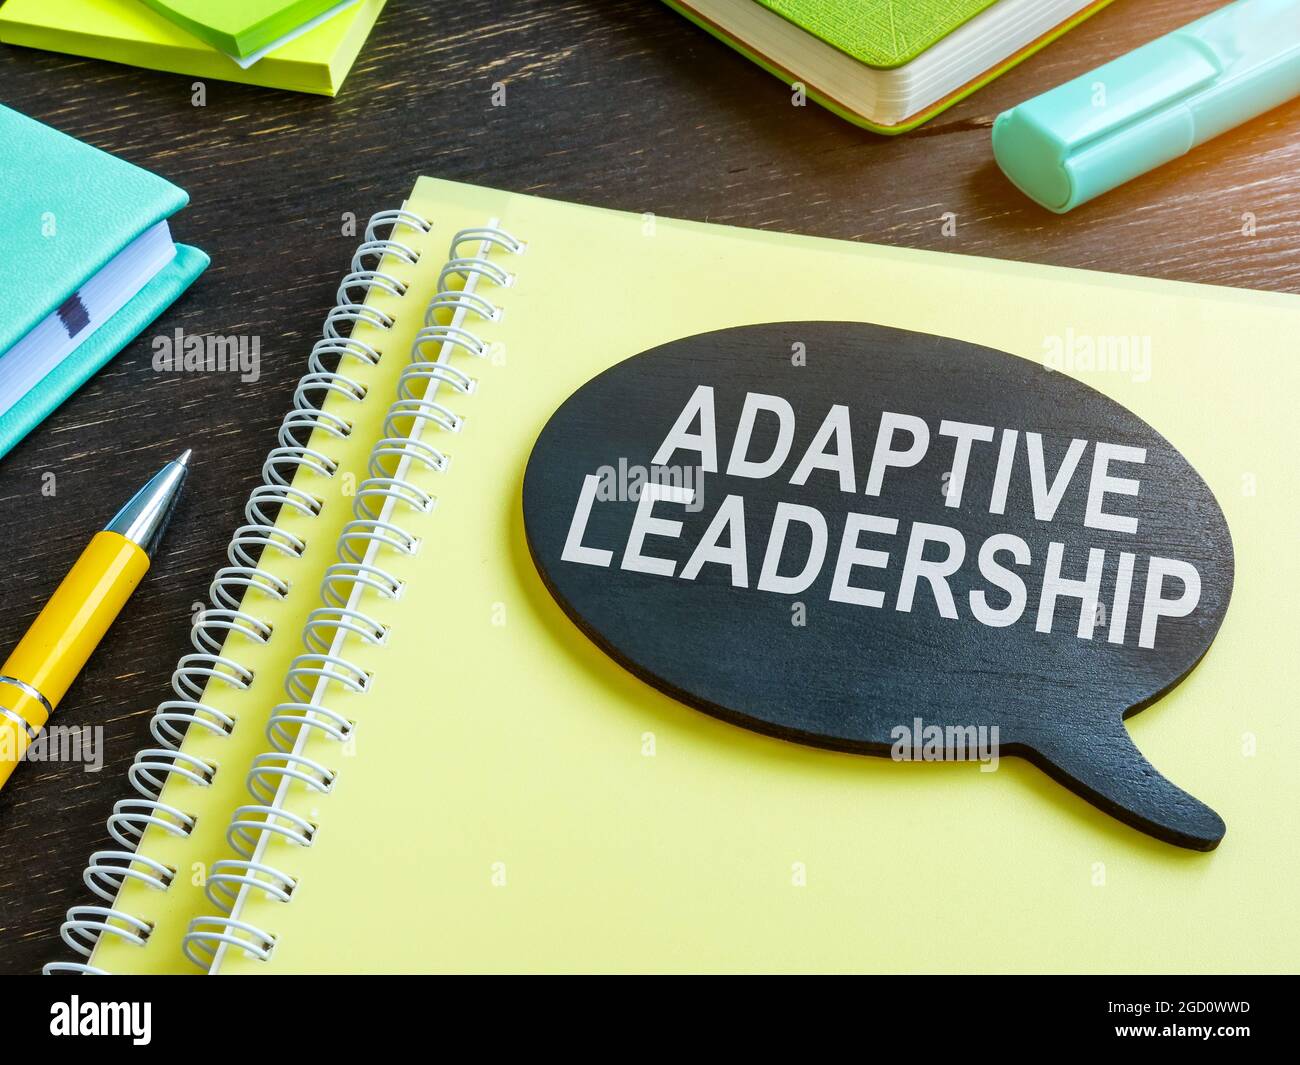 Adaptive leadership phrase on the plate and papers. Stock Photo